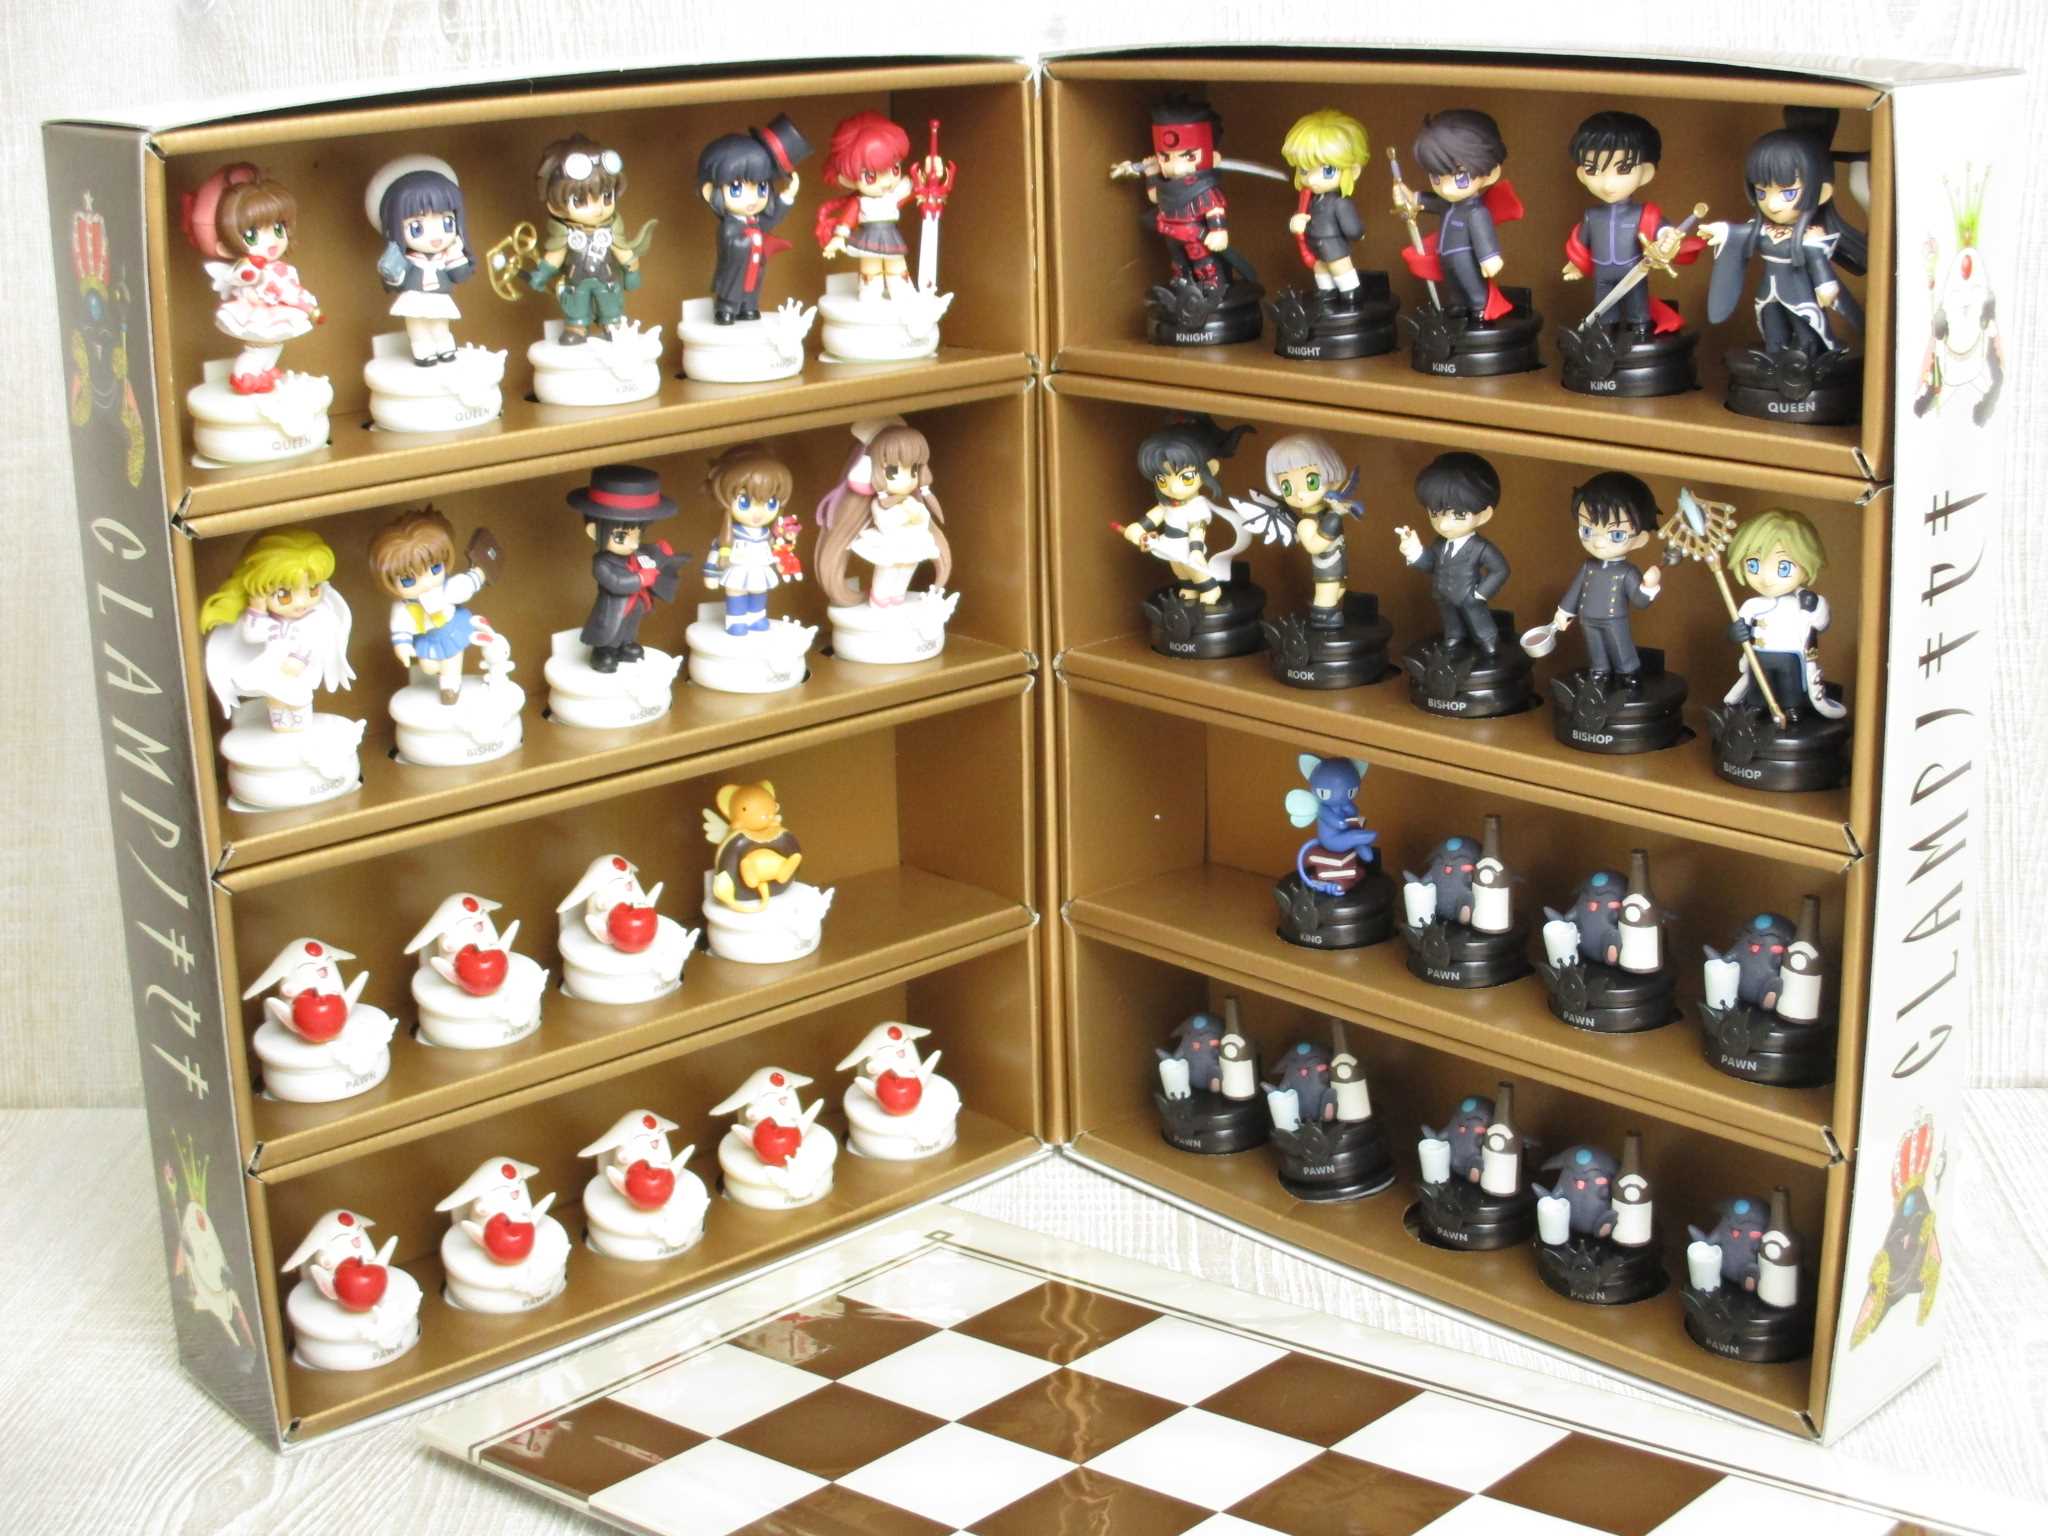 CLAMP NO KISEKI Complete Set 38 Chess Pieces Box Board ...